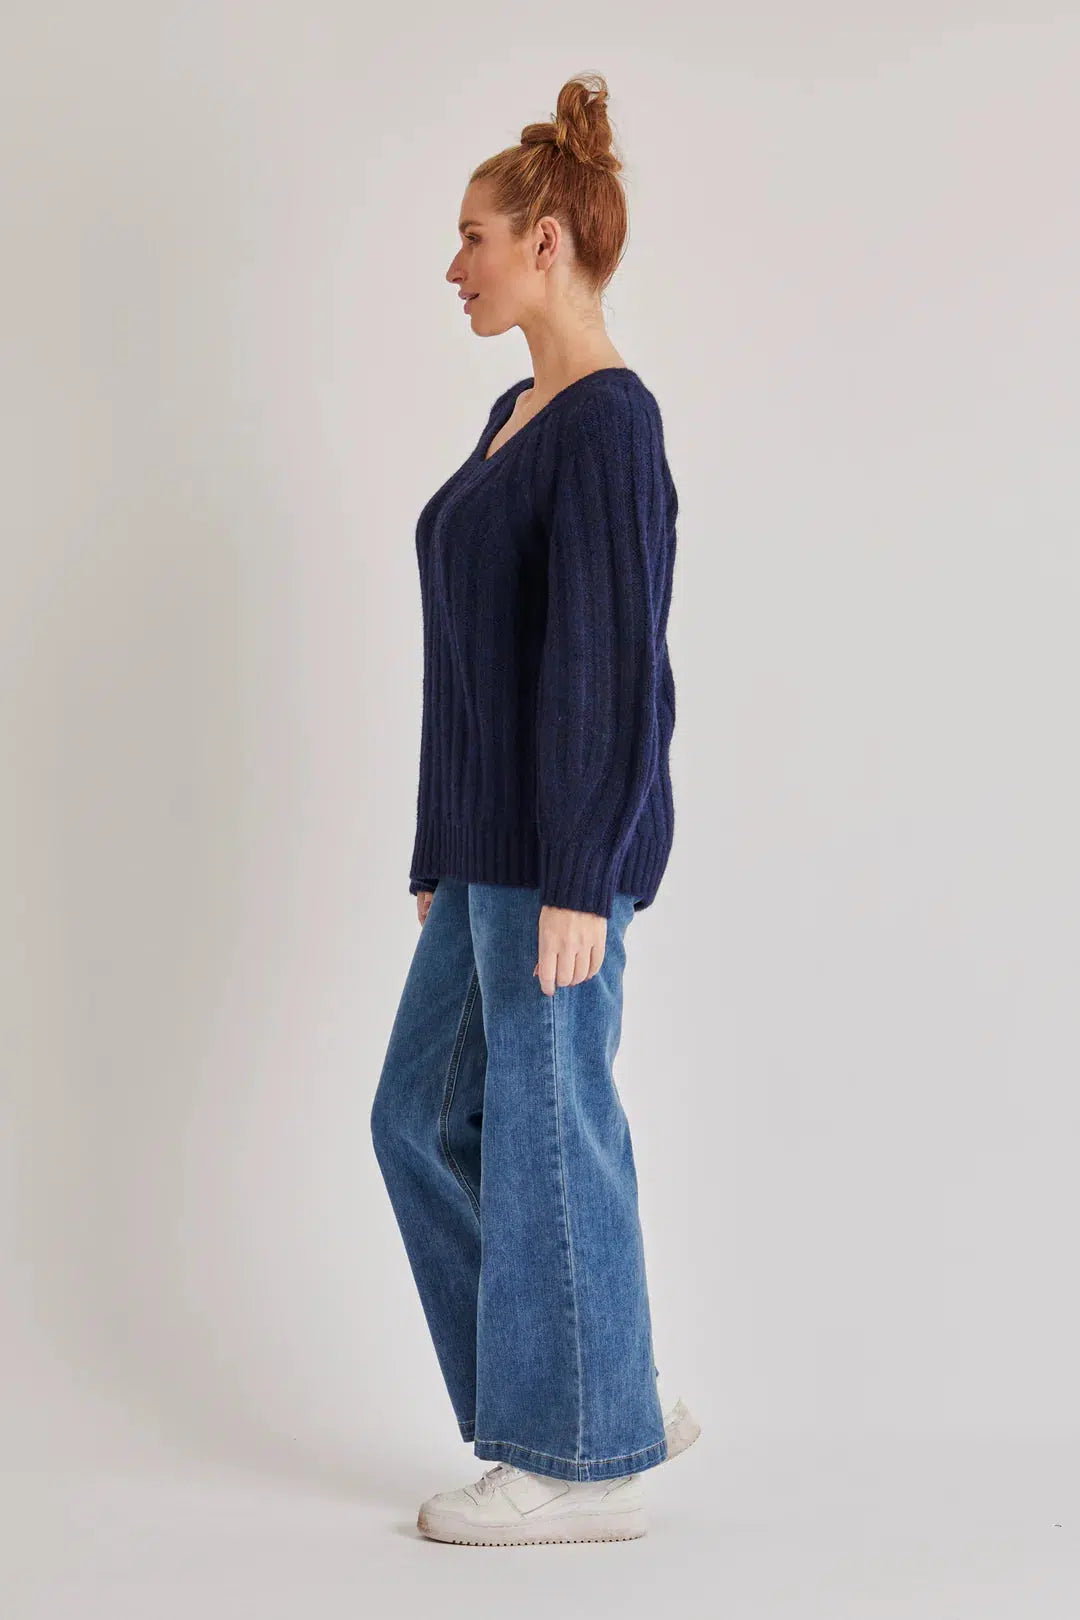 Vneck Rib Knit - Navy-One Ten Willow-Lima & Co